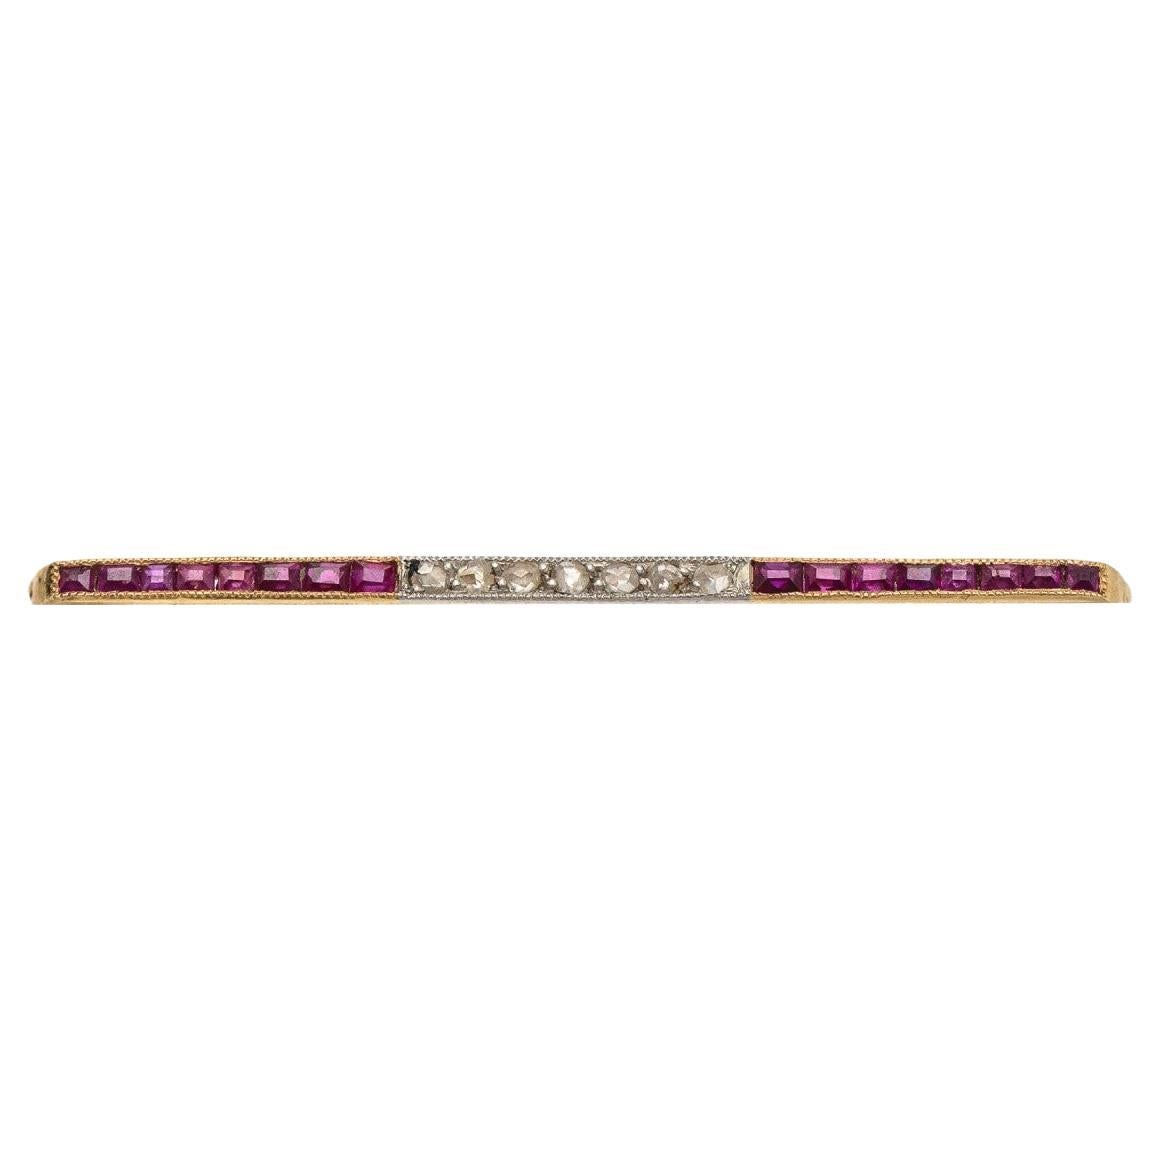 Elegant bar golden brooch with rubies and diamonds, Spain, circa 1940s.